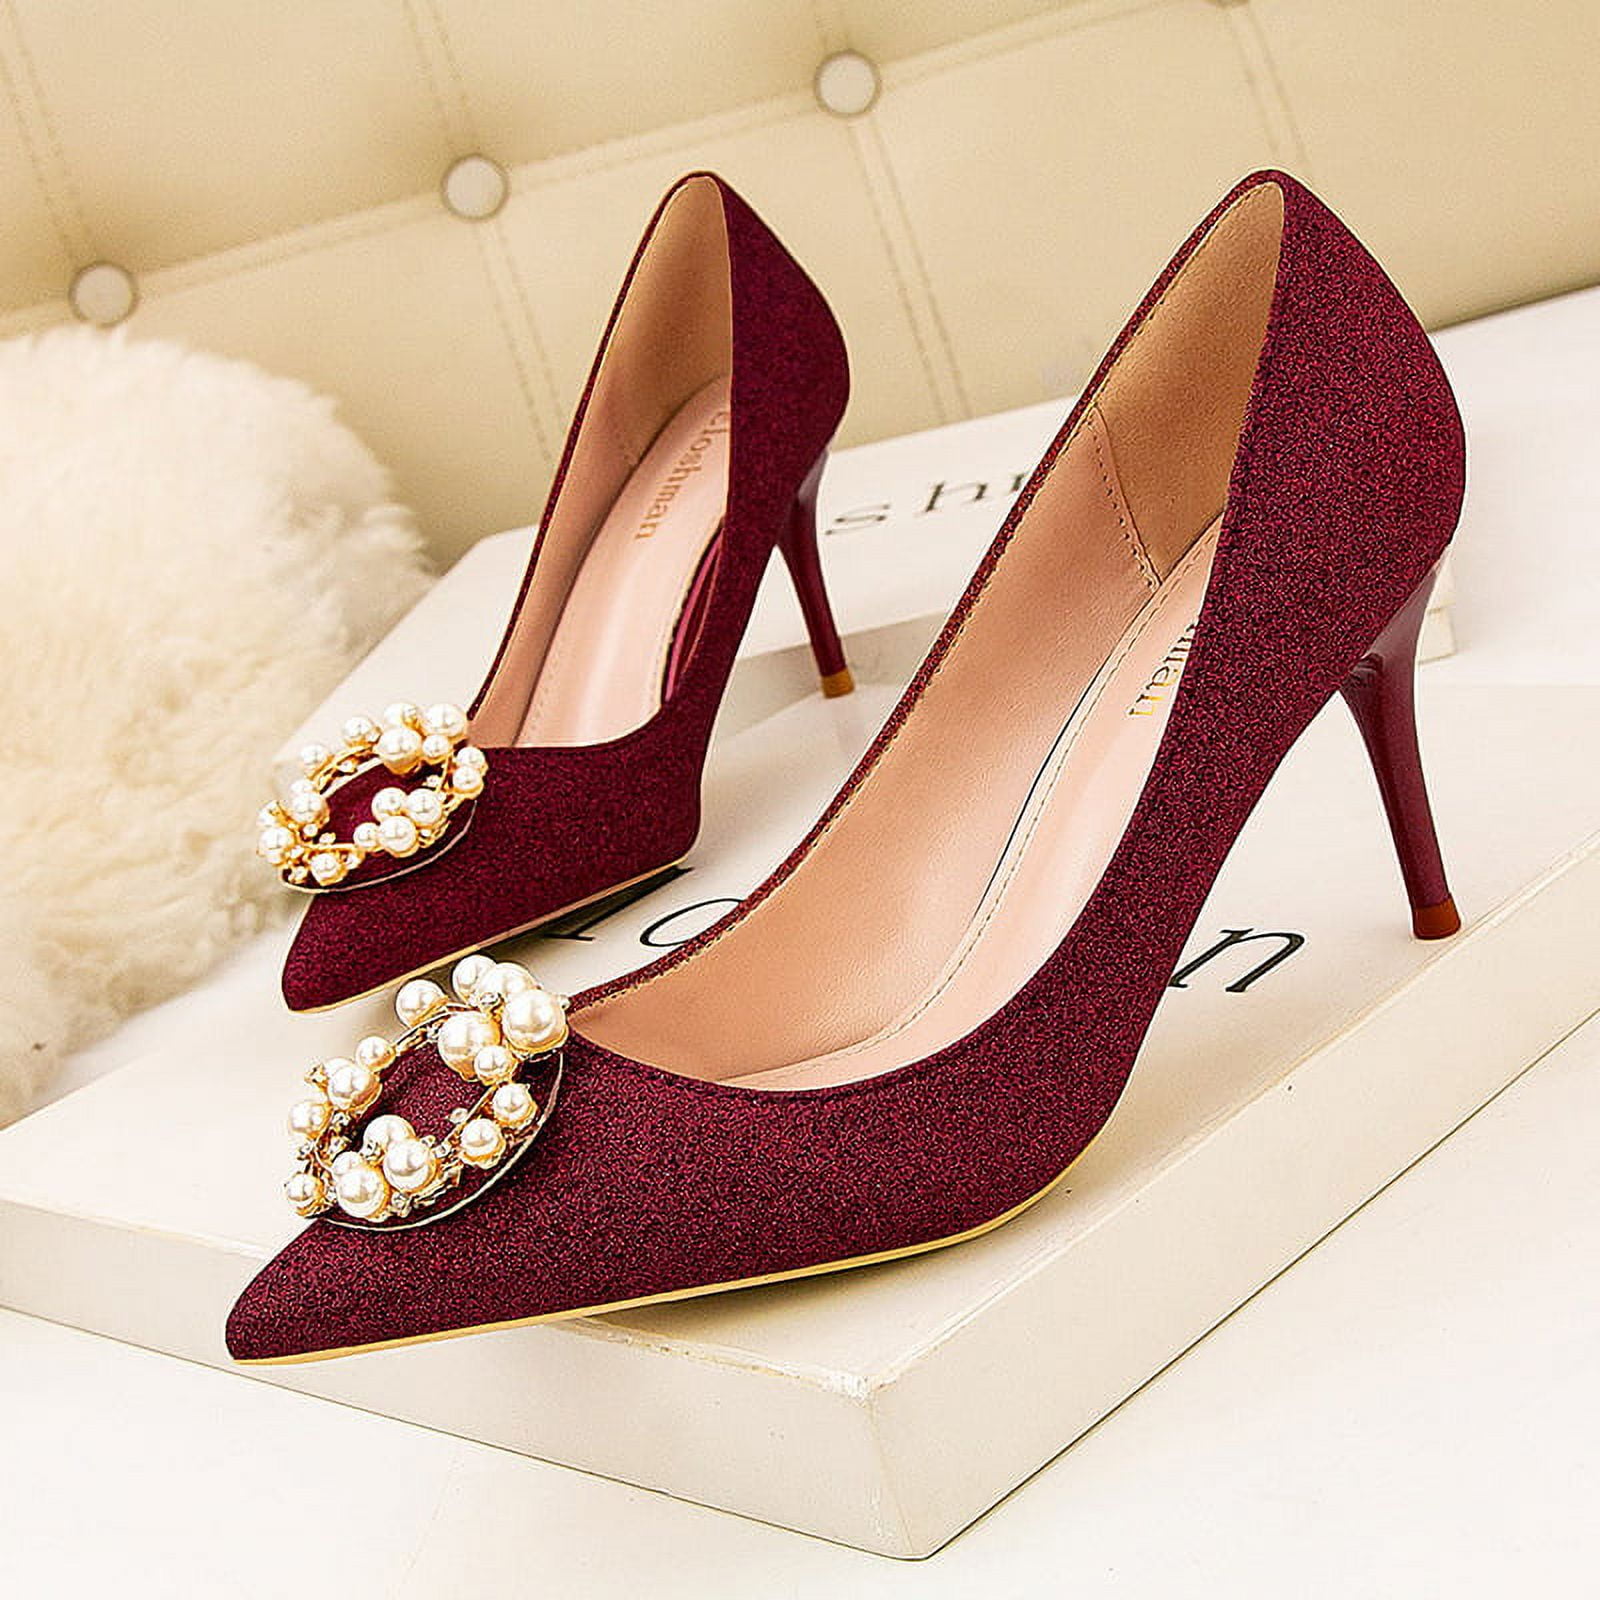 Women's Heels | Buy Online with Free Delivery | PurpleTag.ie